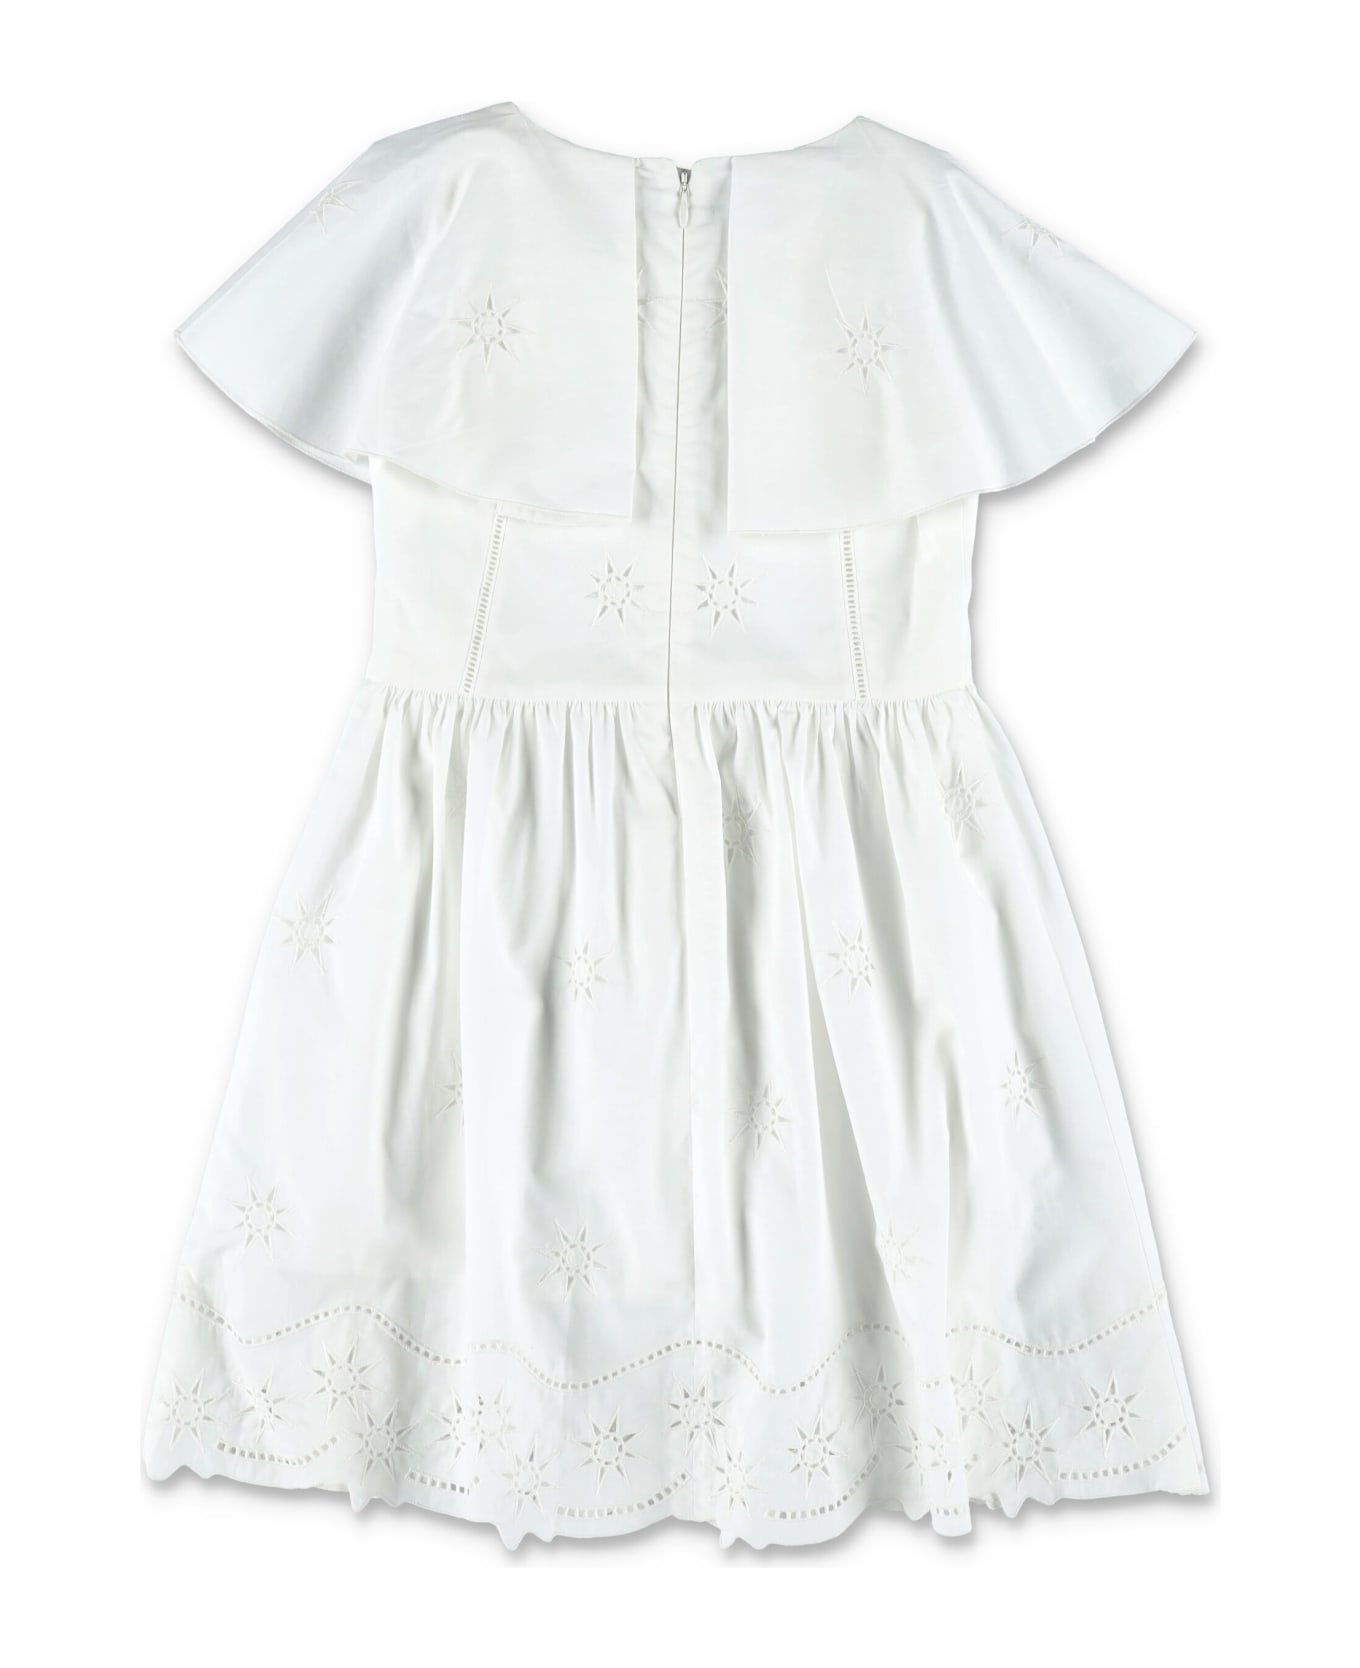 Chloé Embroidered Dress - WHITE